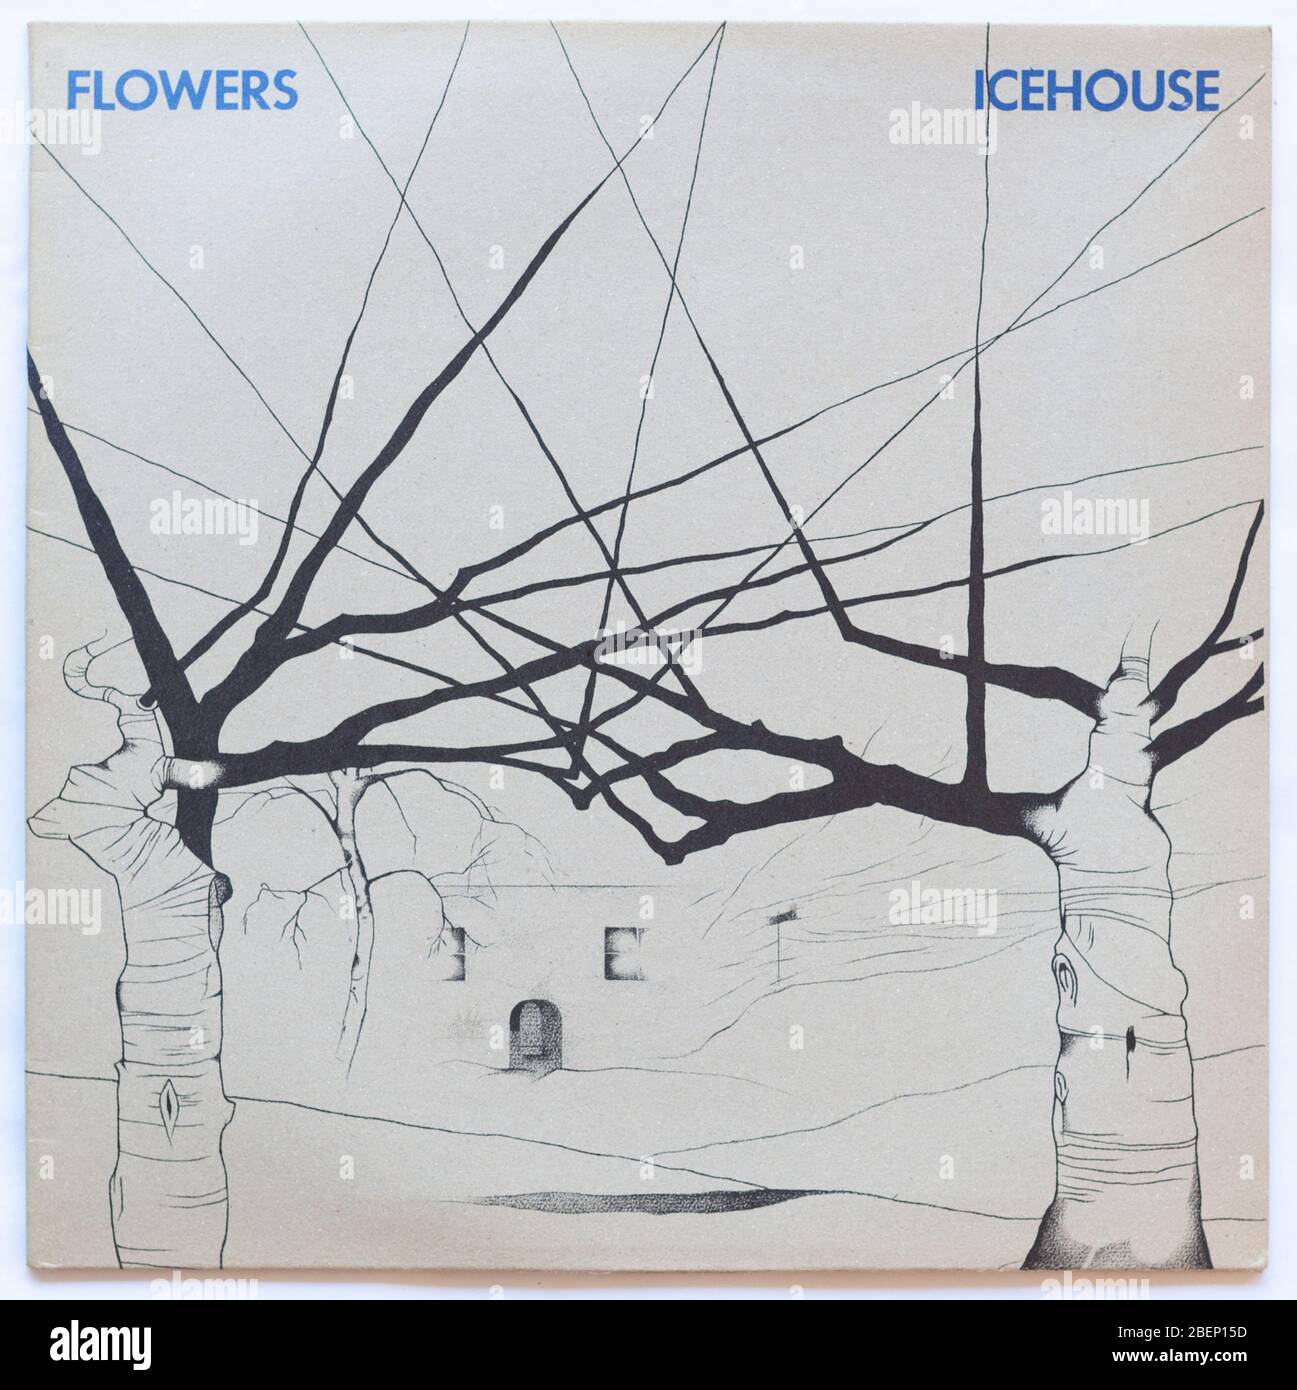 The cover of Icehouse, 1980 album by Flowers (later to become Icehouse on Regular. - Editorial use only Stock Photo